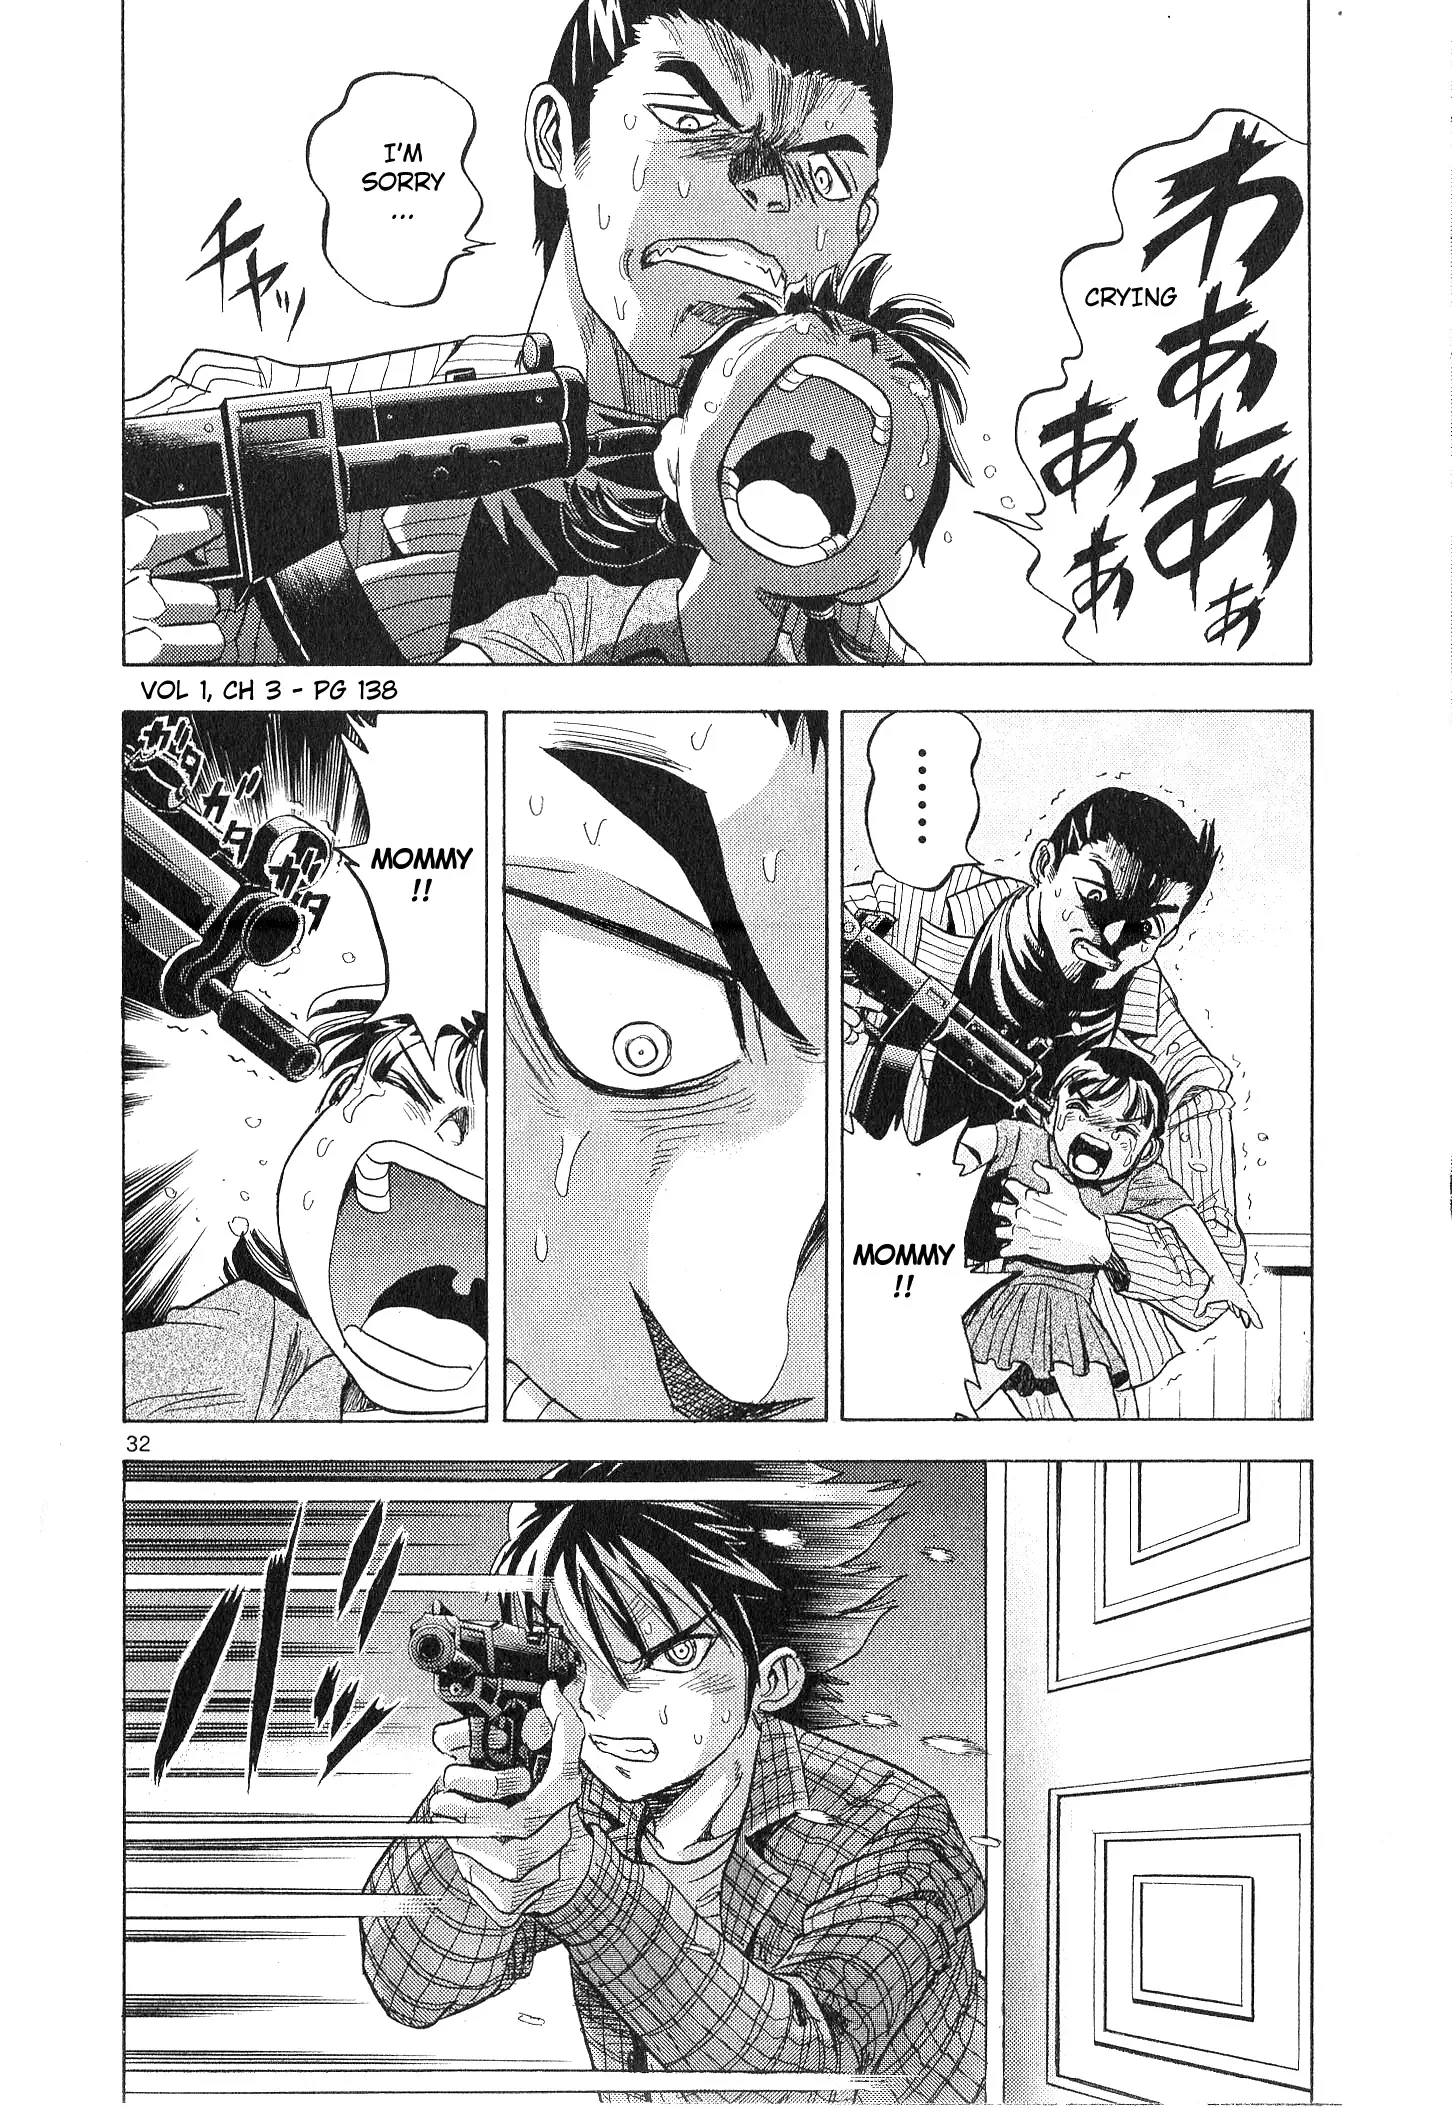 Mobile Suit Gundam Aggressor - 3 page 32-2a01f8b9